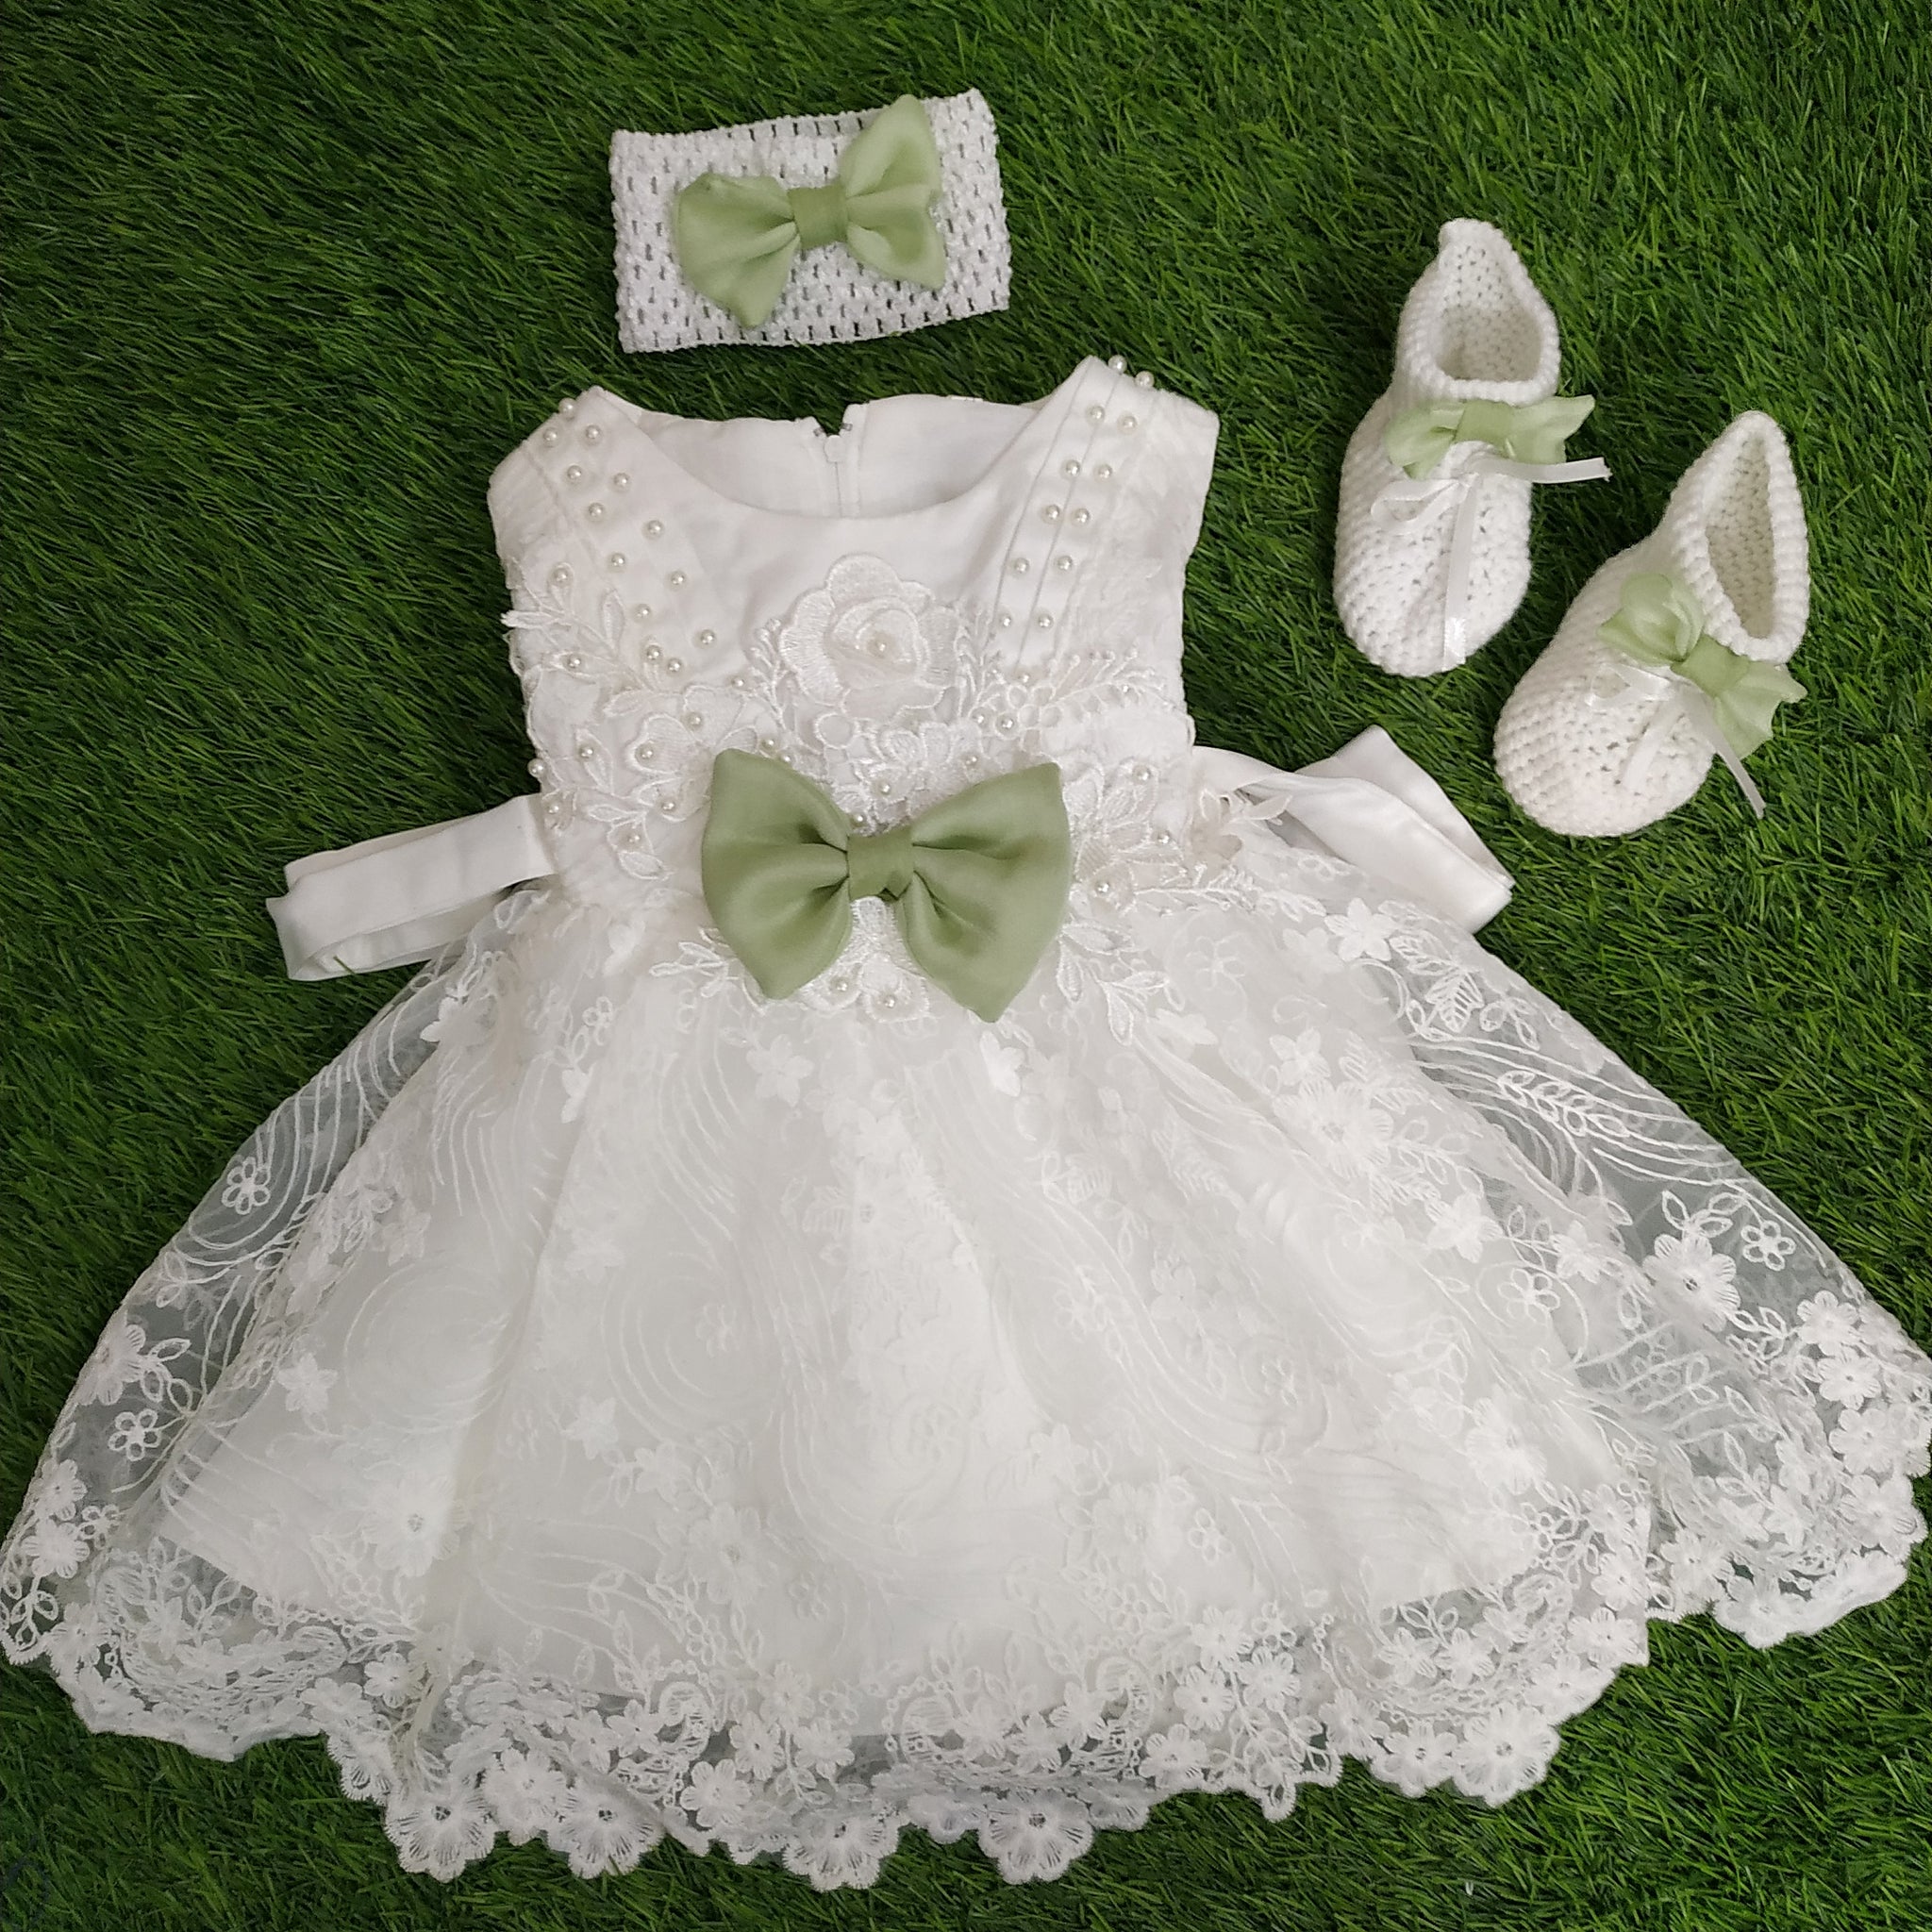 Is there an online site which sells baby girl dresses? - Quora